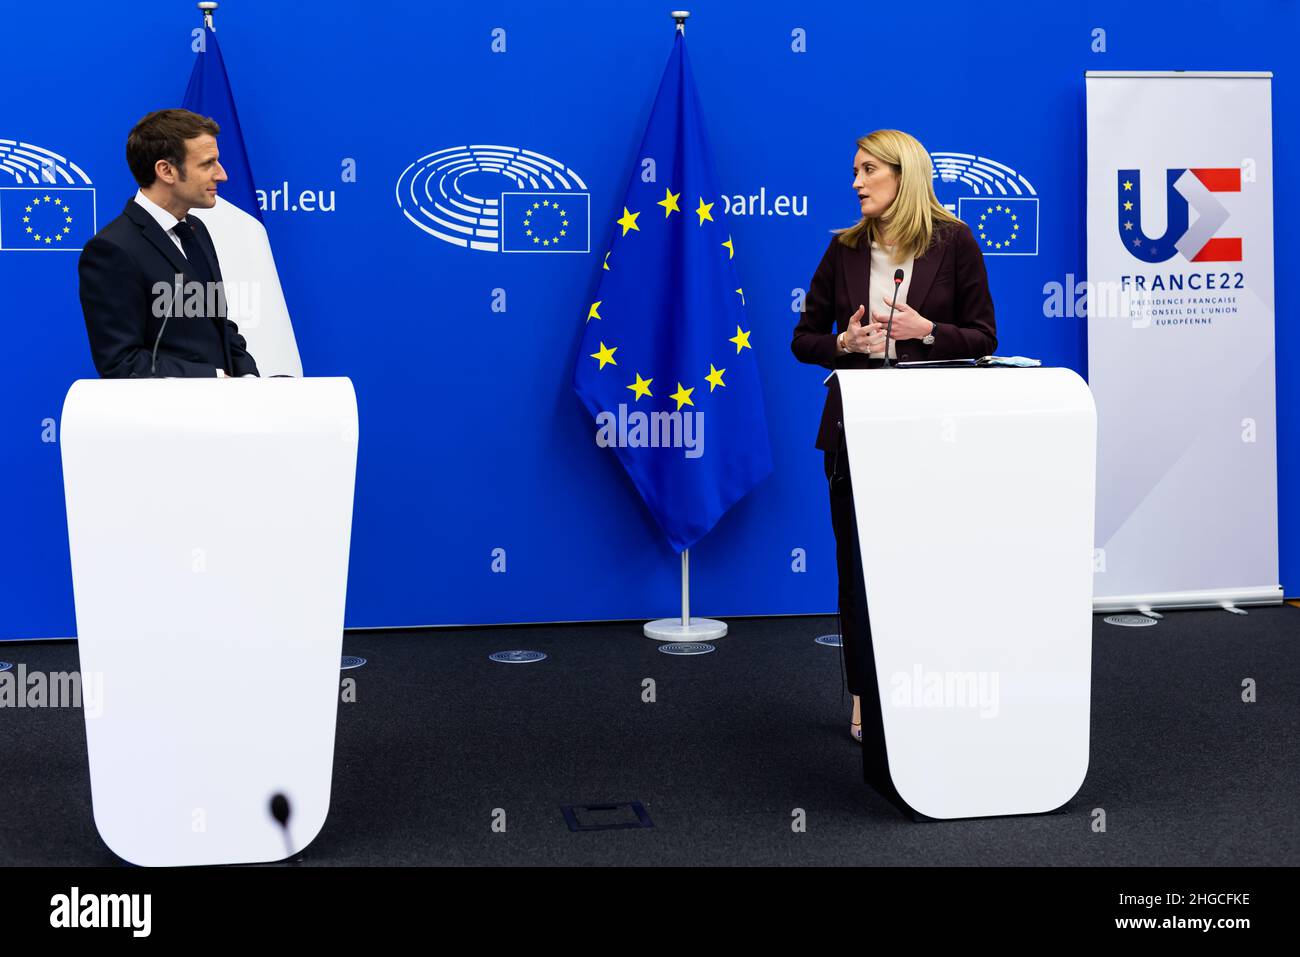 19 January 2022, France, Straßburg: Emmanuel Macron (l, LaREM), President of France, and Roberta Metsola (r, Partit Nazzjonalista), President of the European Parliament, stand during a press statement in the European Parliament building. During today's plenary session of the European Parliament, Emmanuel Macron presents the objectives of France's incoming presidency. Photo: Philipp von Ditfurth/dpa Stock Photo